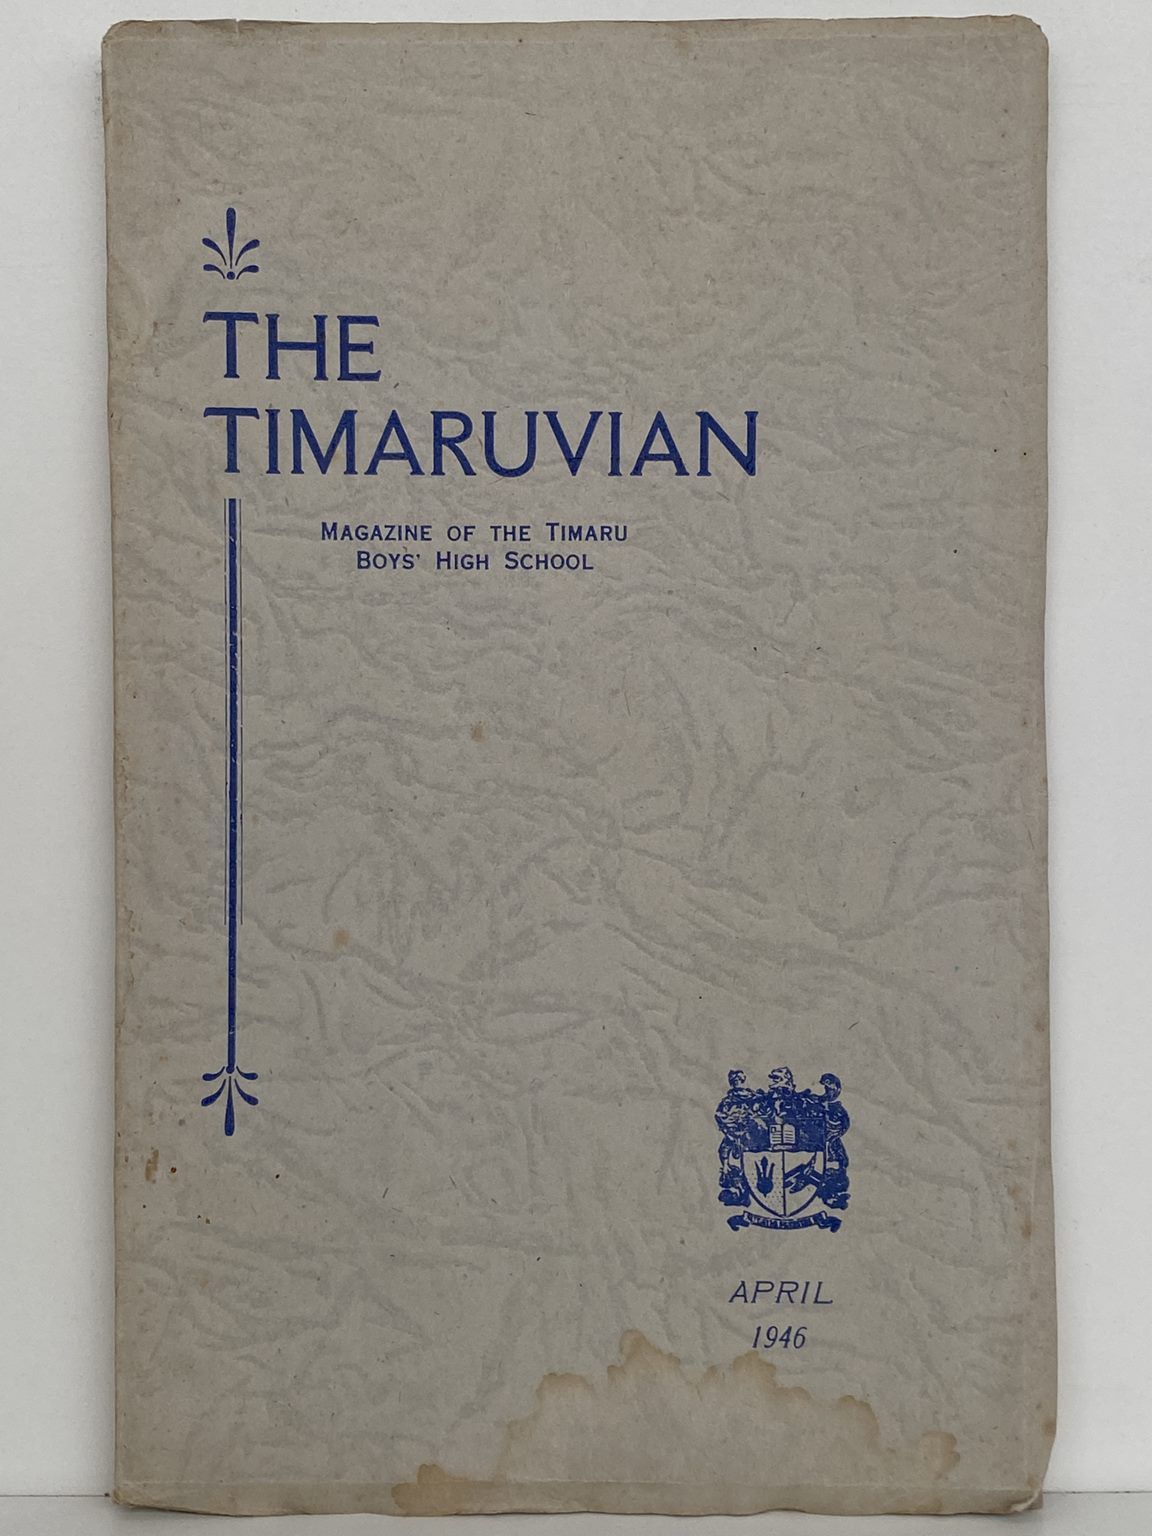 THE TIMARUVIAN: Magazine of the Timaru Boys' High School and its Old Boys' Association 1946